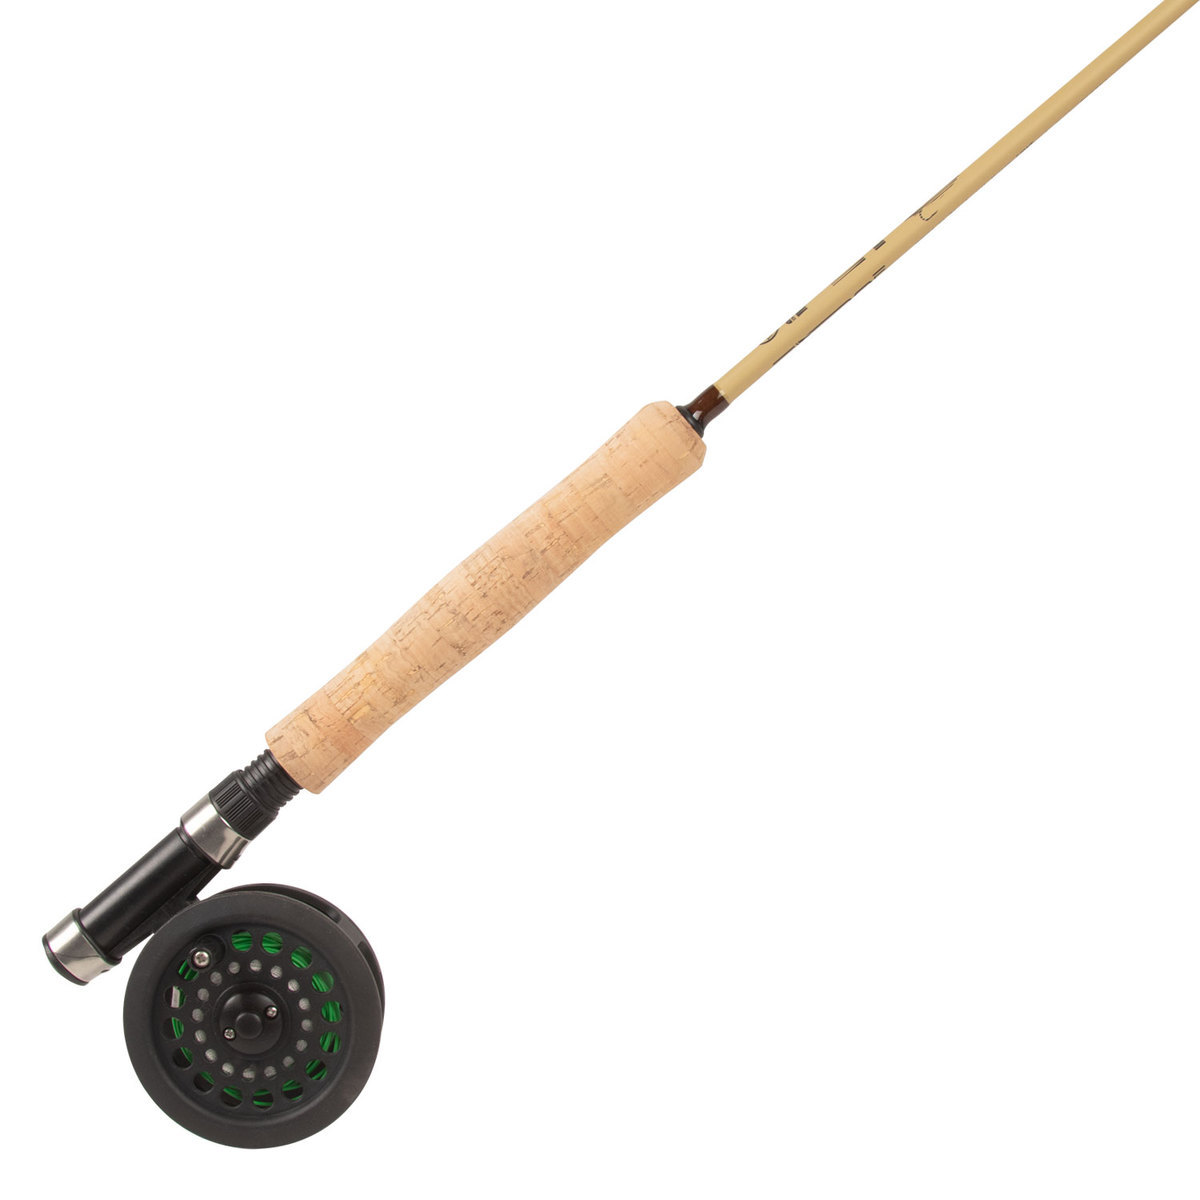 South Bend R2F Salmon Fishing Rod & Reel Spin Combo w/ Tackle Kit, 7' 6